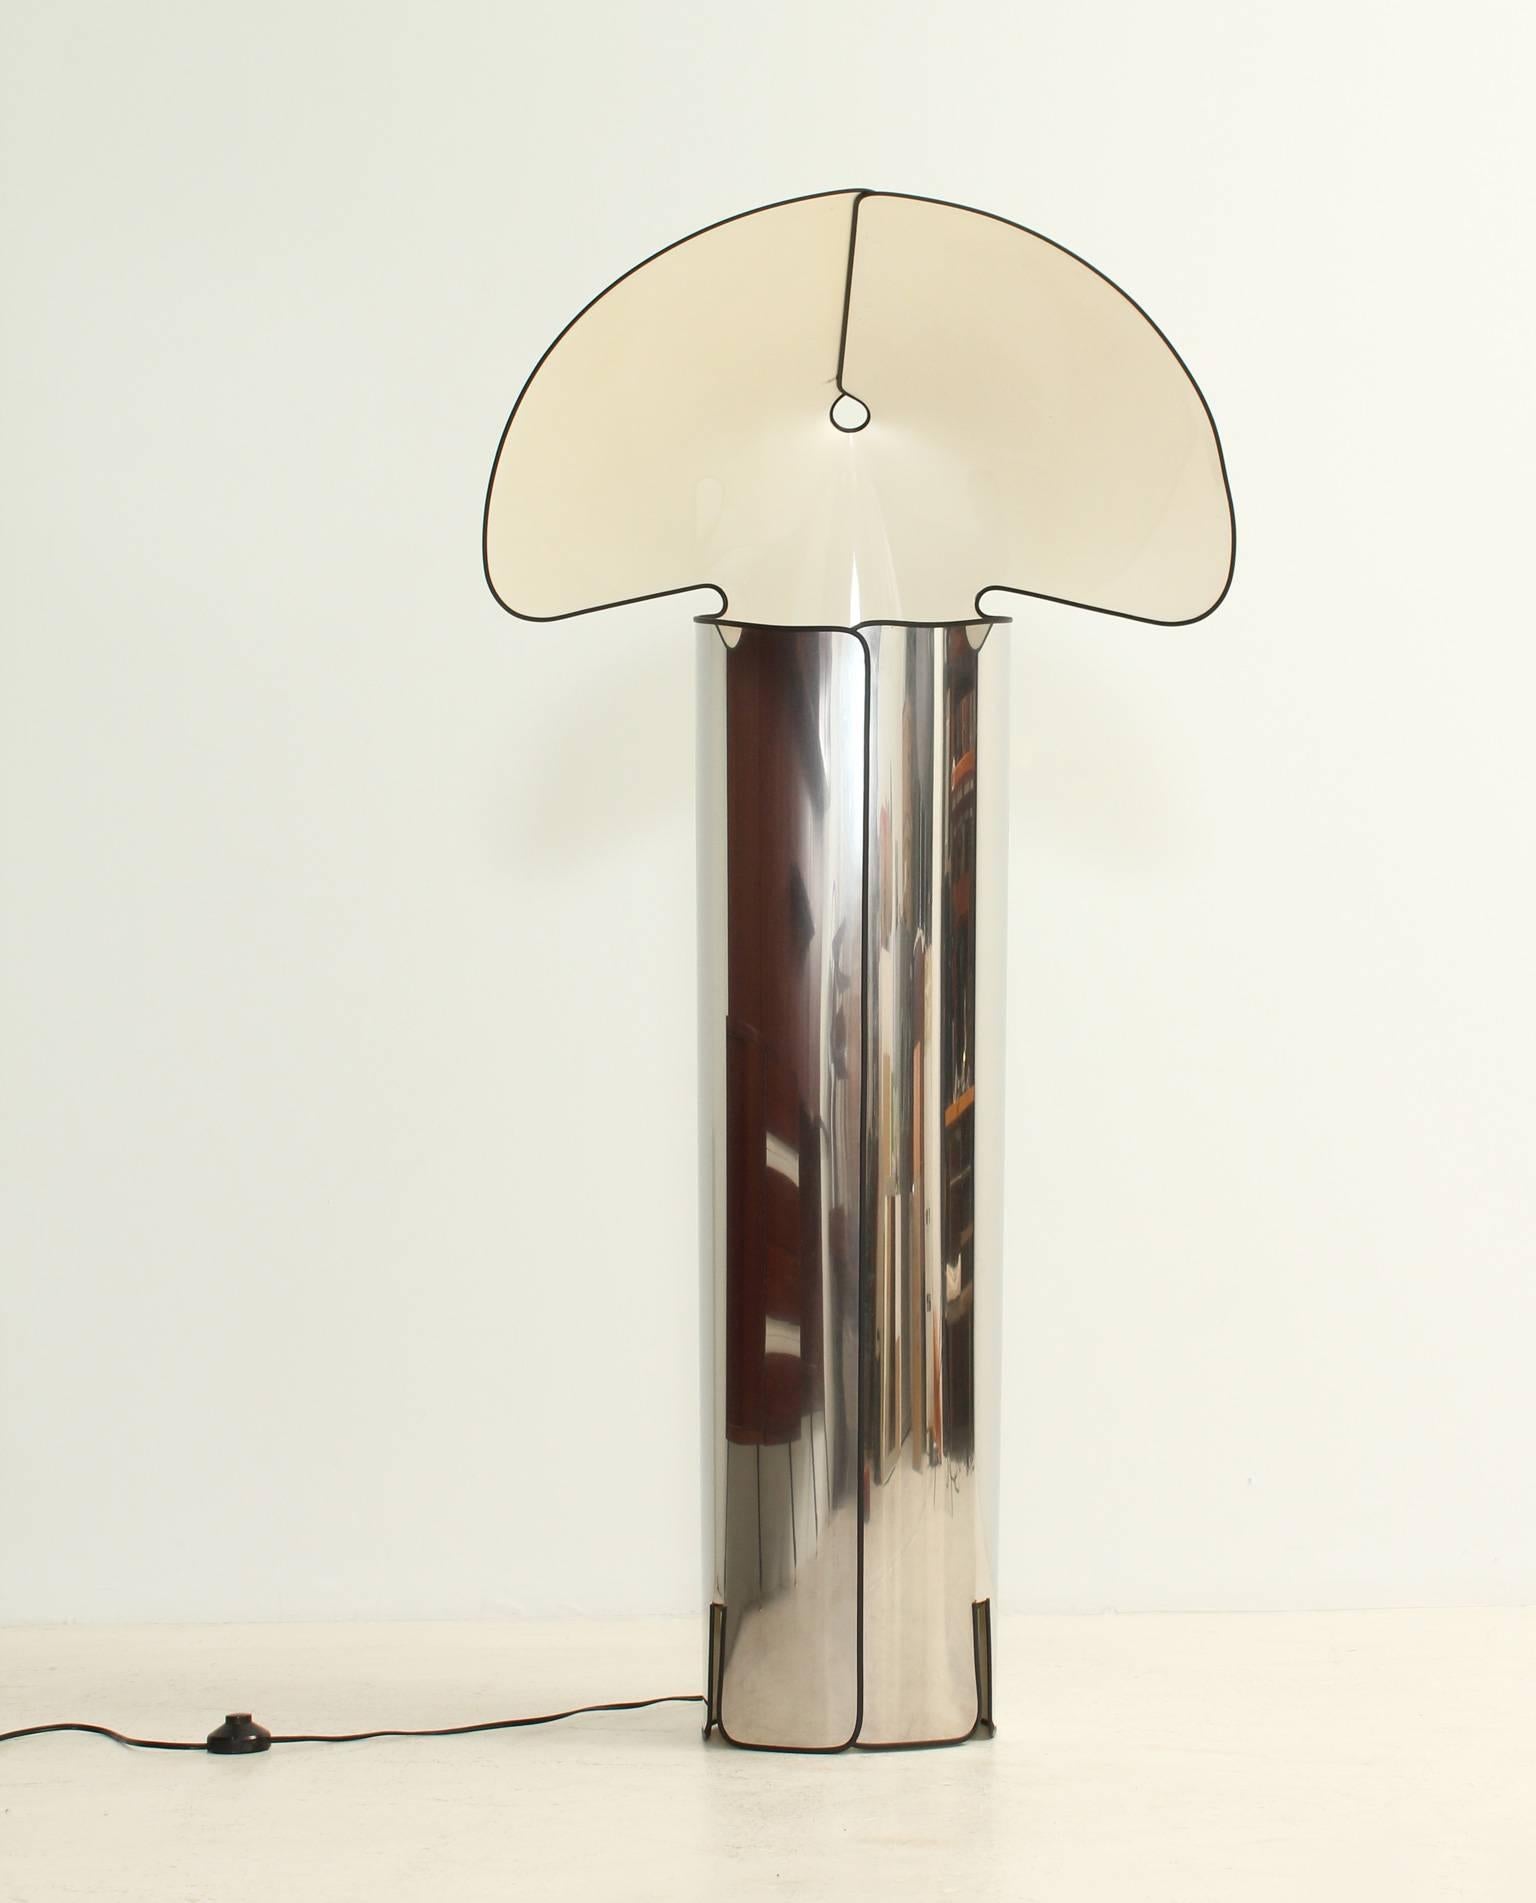 Chiara floor lamp designed in 1967 by Mario Bellini for Flos, Italy. Made of one sheet of folded stainless steel.